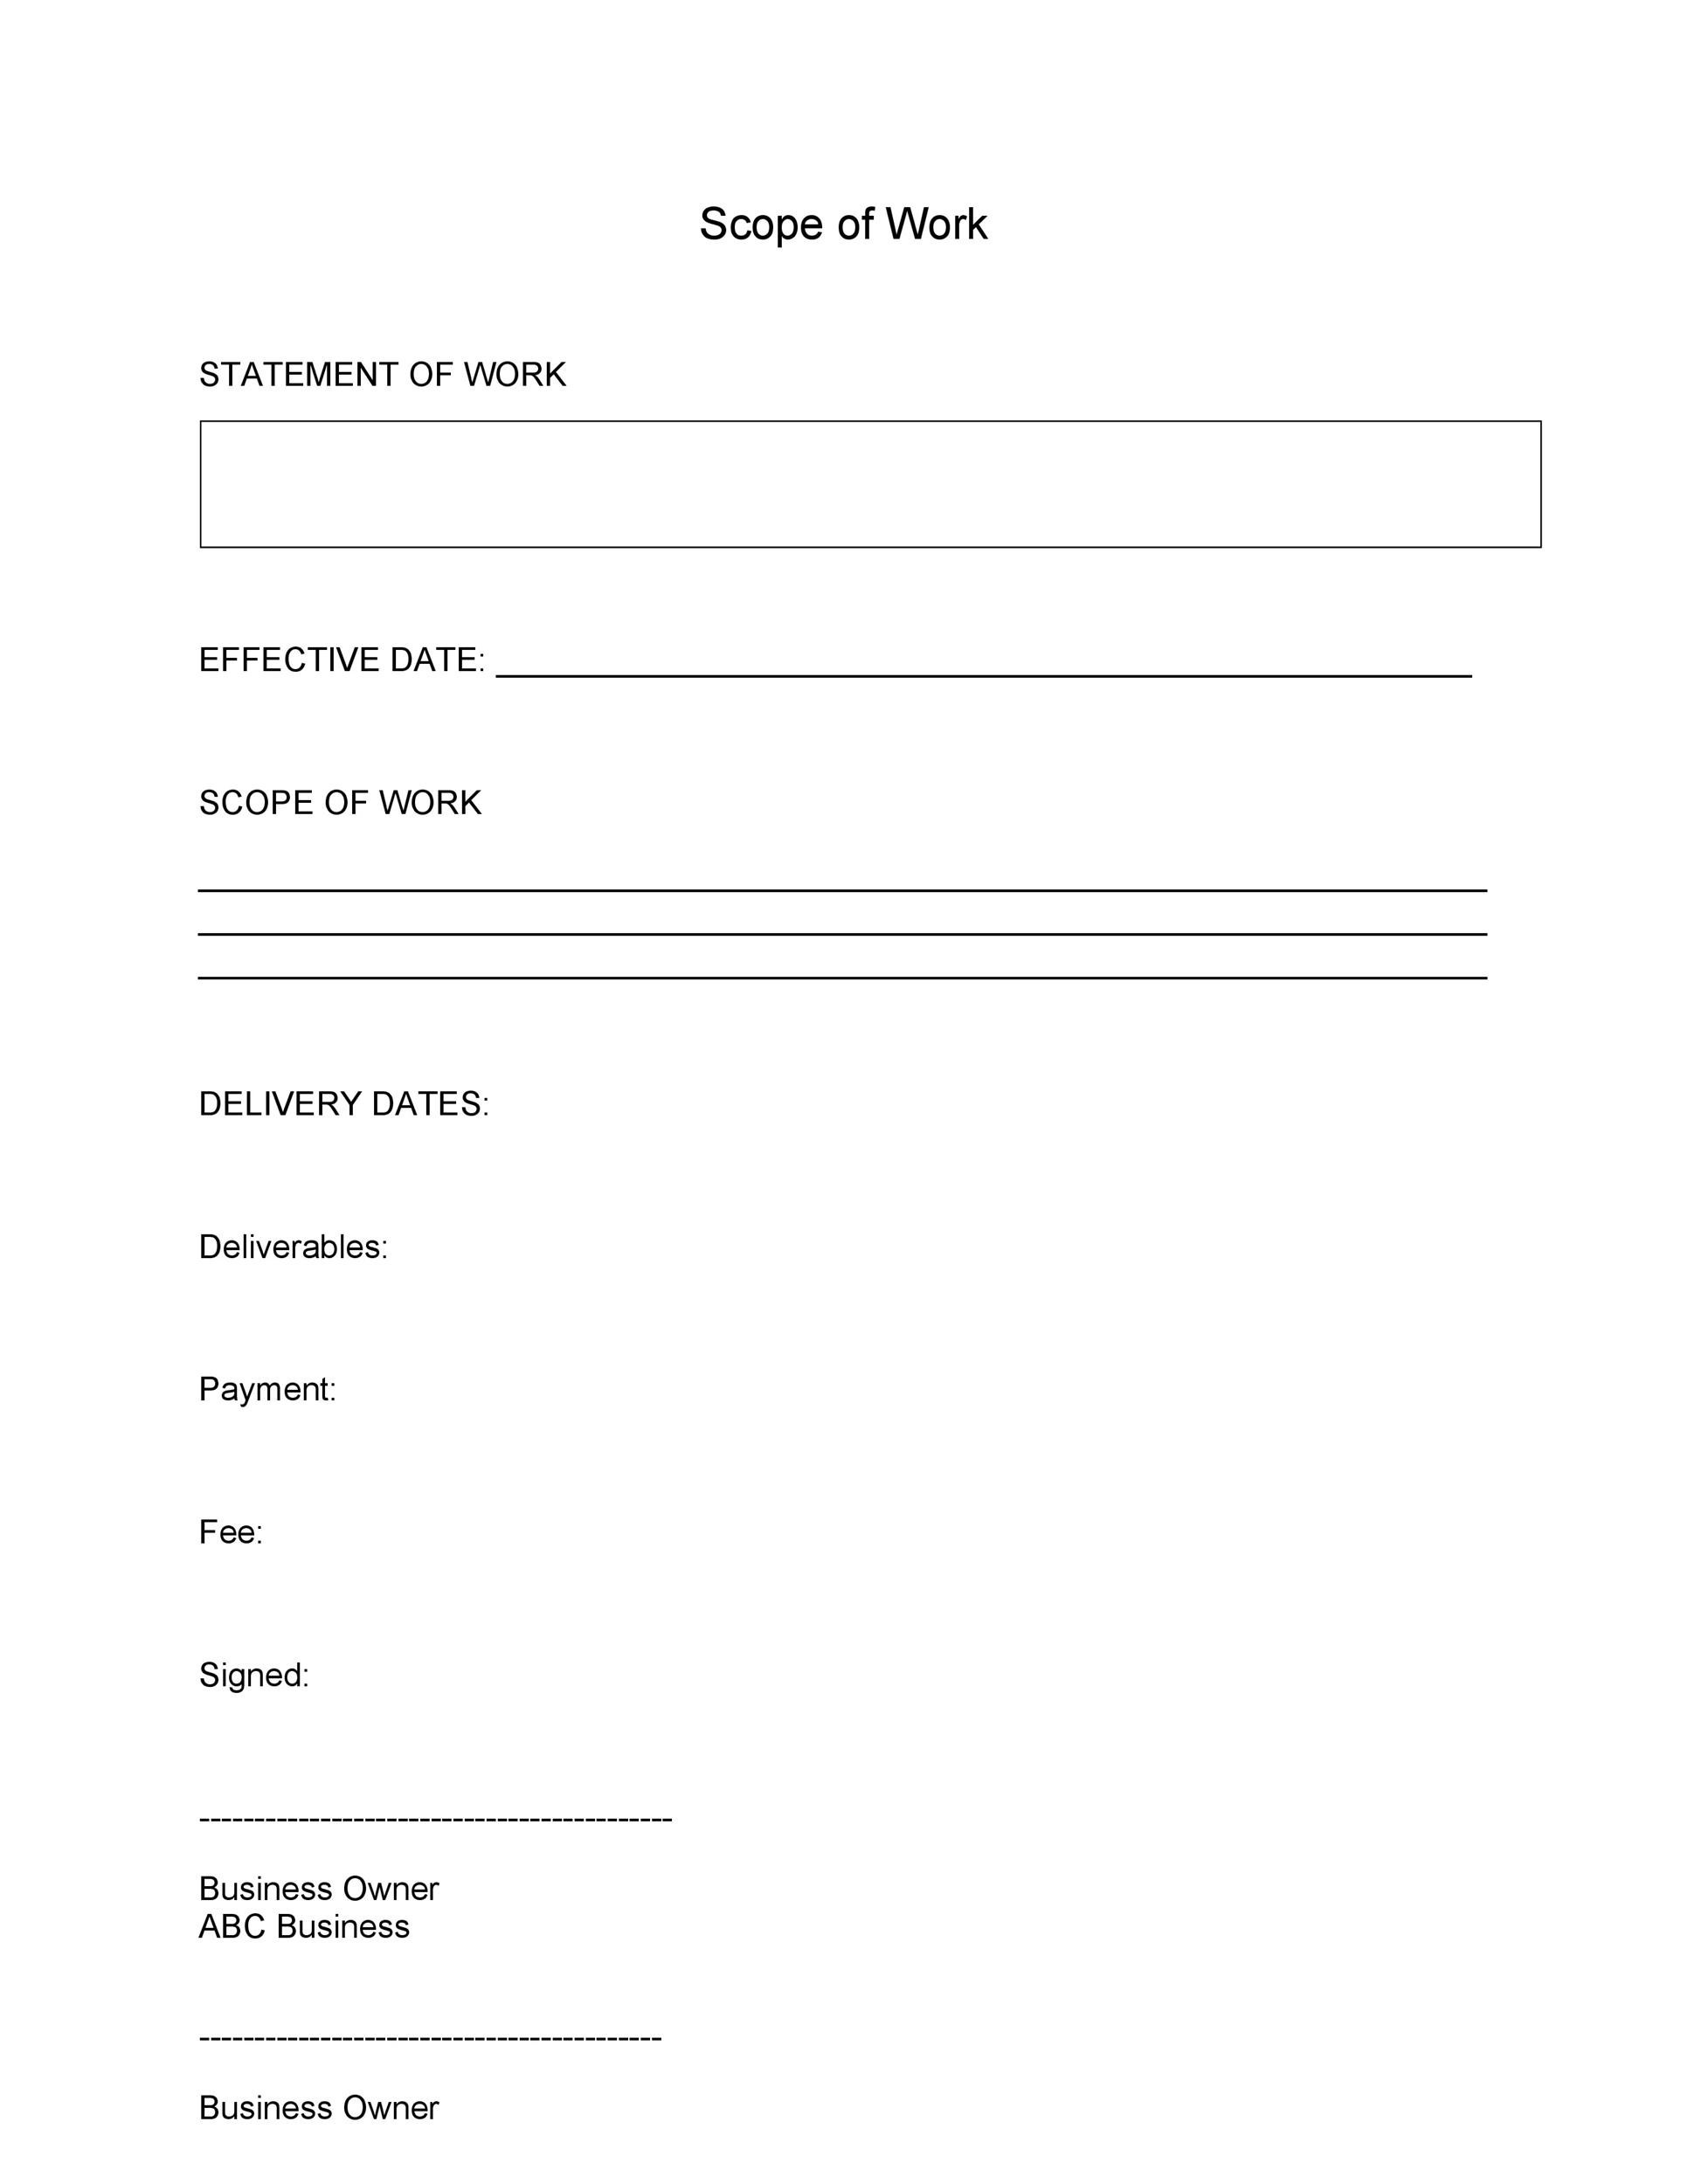 scope-of-work-template-ms-wordexcel-templates-forms-checklists-images